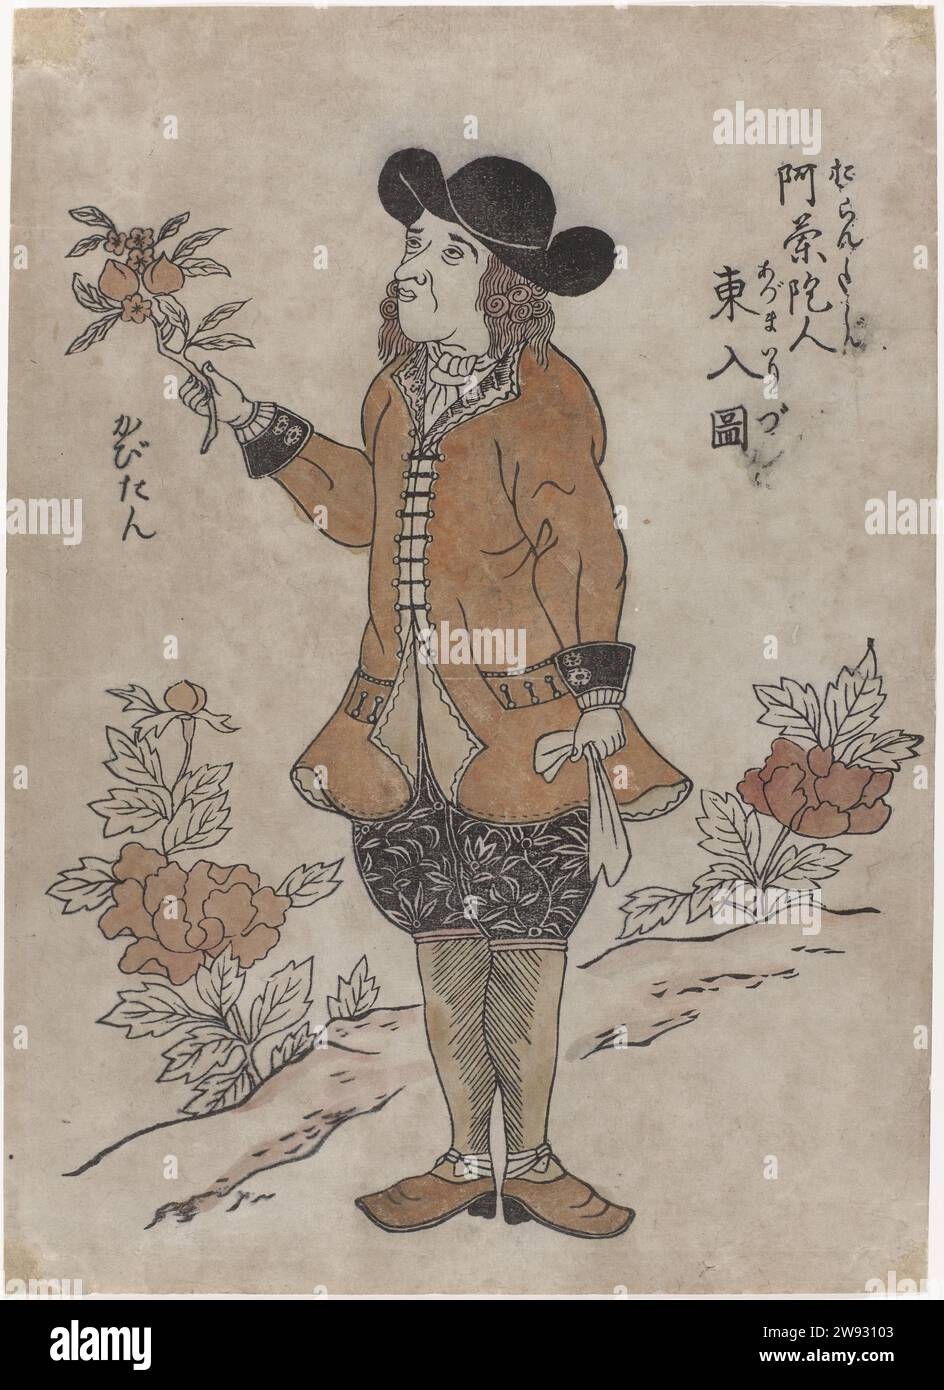 Captain: Hollander who came to the east, Anonymous, c. 1700 print Nagasakiprent. Man completely (hollander) with a hat on medium length hair. In his right hand he holds a blossom branch, a handkerchief in the left. Left and right of his inscription in Japanese characters and two large flower branches. Jacket and flowers orange-brown colored; Her and stockings colored beige-brown. Inscription; L.: 'Kapitan'. r.: 'Orand-Jin Azuma Iri No Zu' (in Japanese signs). Nagasaki-e. DESHIMA paper  standing figure. trees (+ branch, stick). handkerchief DESHIMA Stock Photo